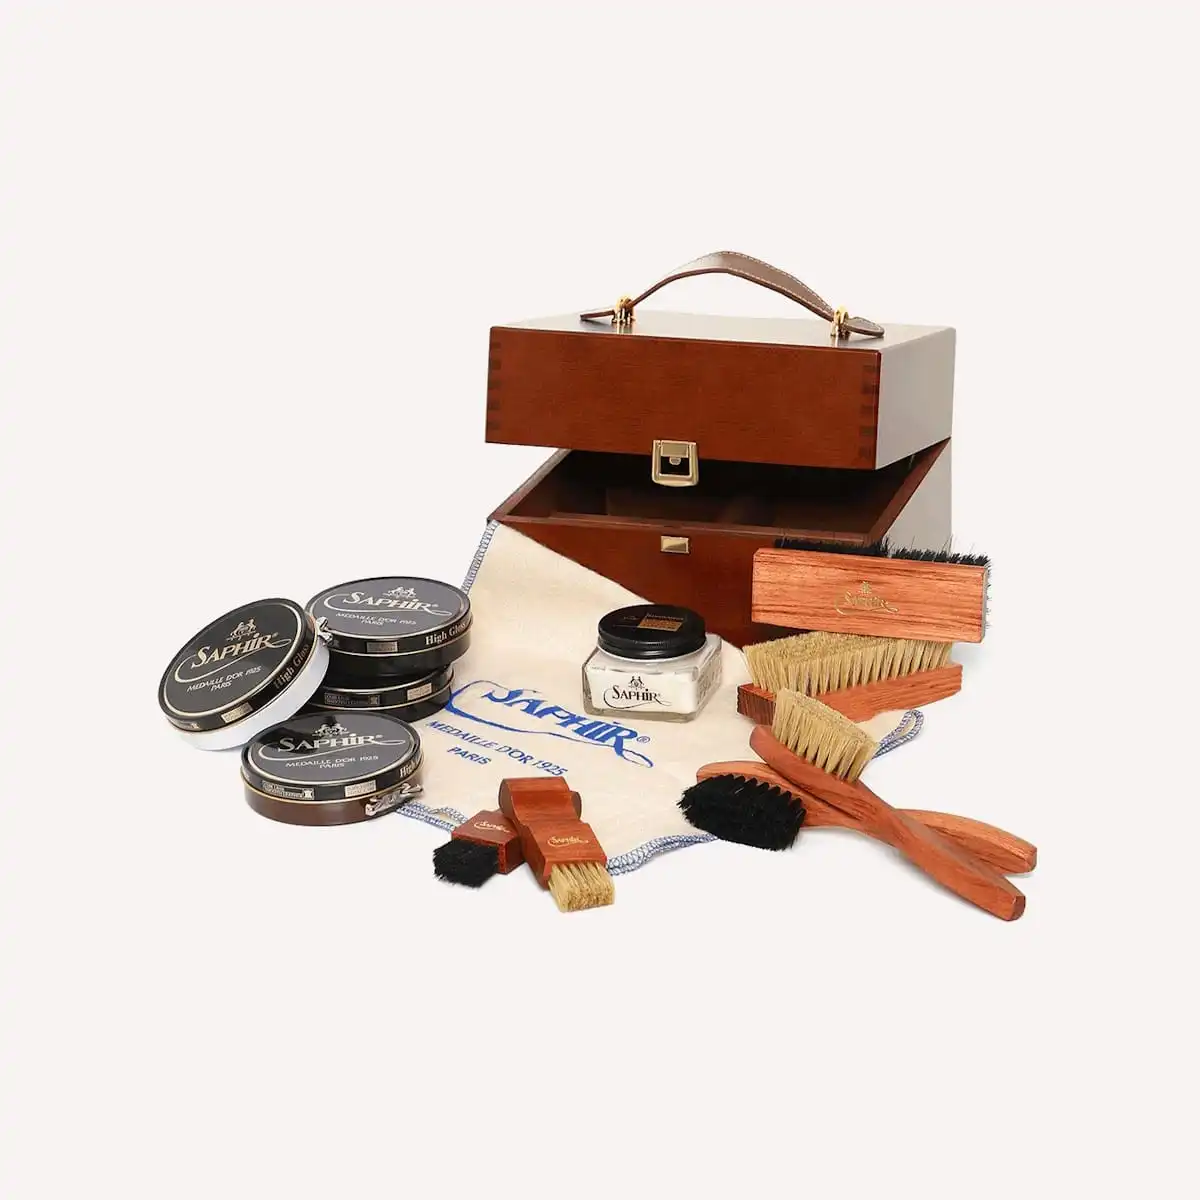 12 Best Shoe Cleaning Kits